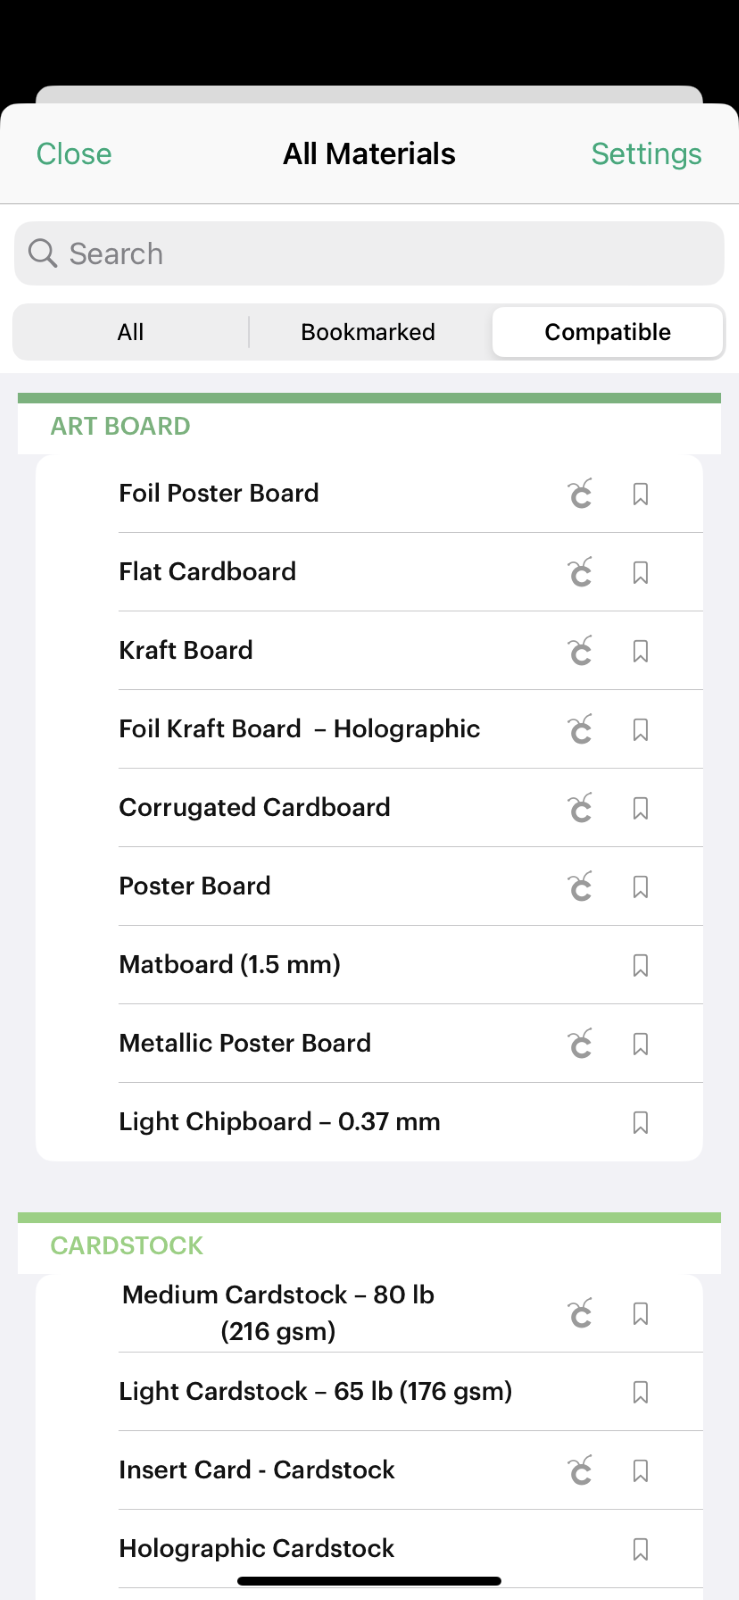 Create a Custom Material Setting on your Cricut for Zicoto Sticker